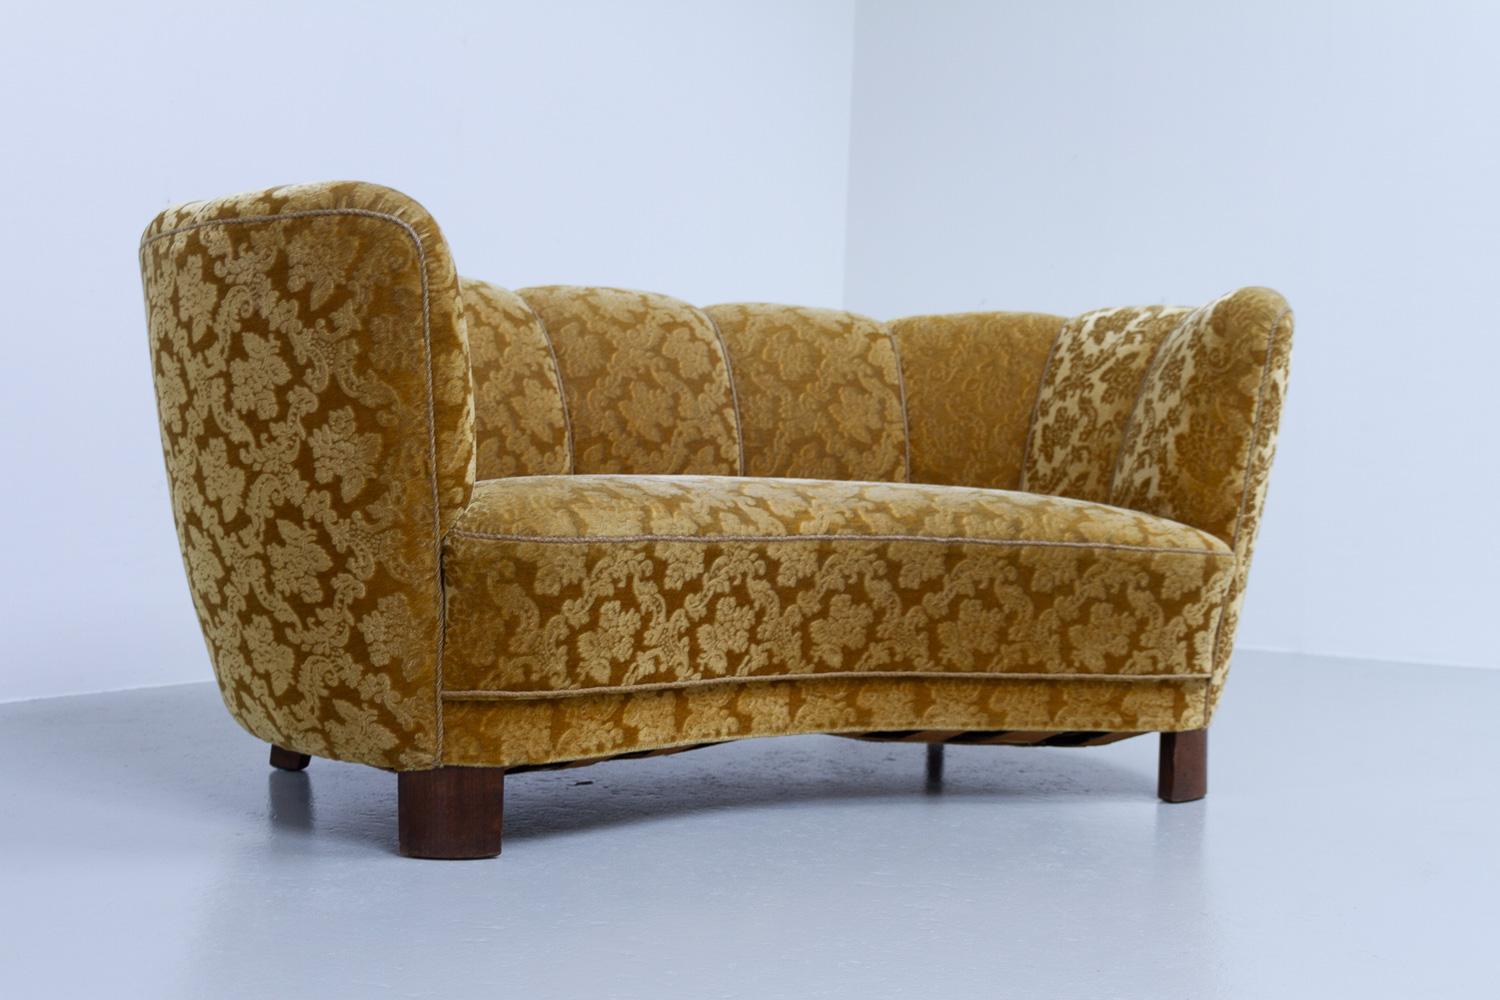 Vintage Danish velvet Art Deco banana sofa, 1940s.

Vintage Art Deco banana-shaped loveseat upholstered in golden mohair velvet with floral motifs made by cabinetmaker in Denmark in the 1940s. Curved two-seater with original spring and velour